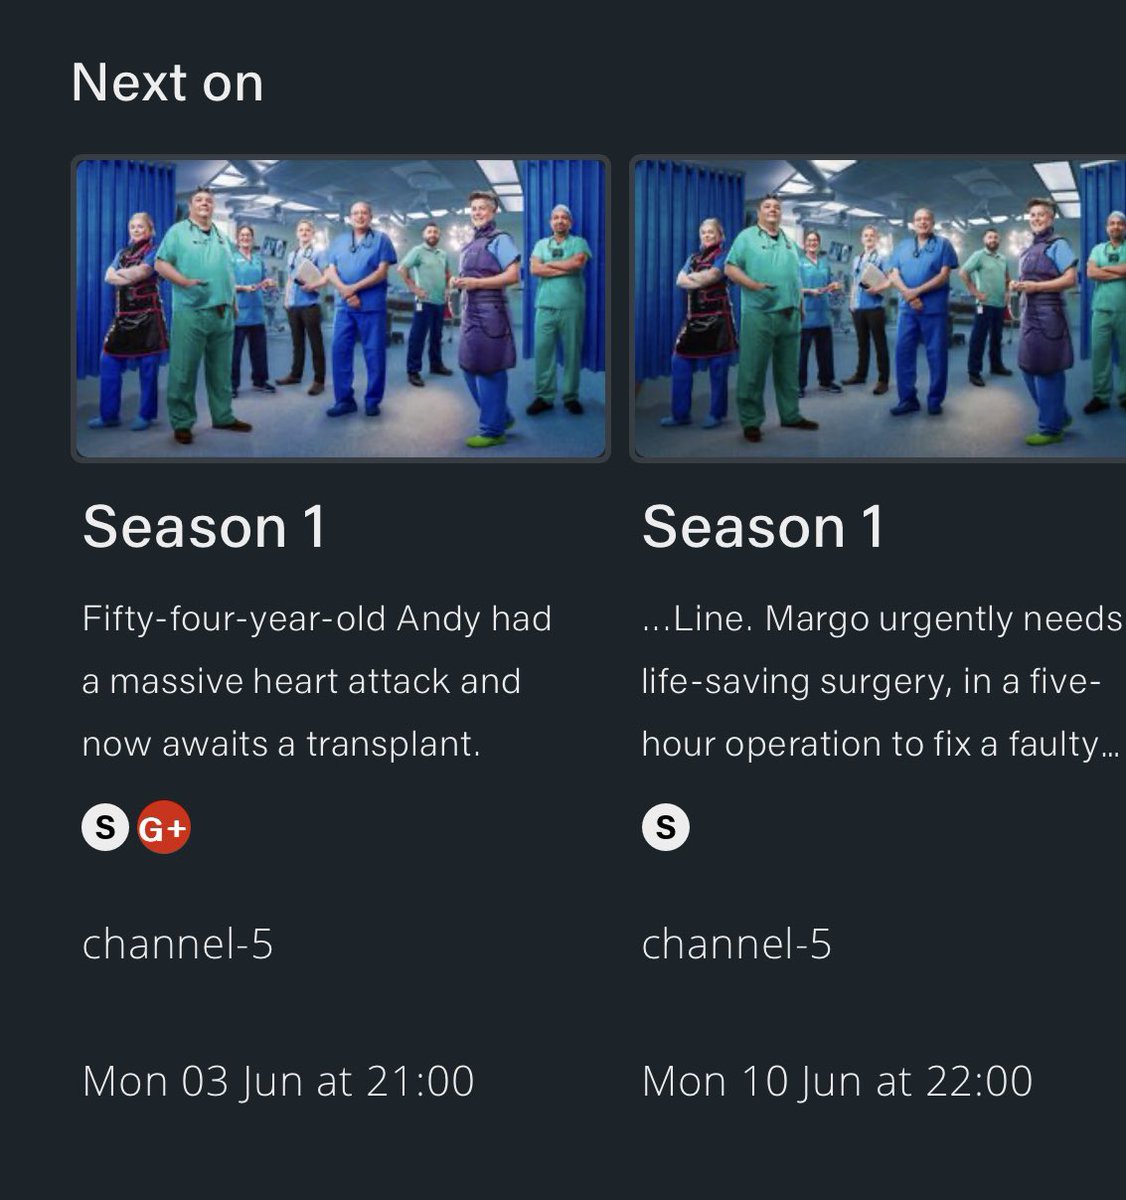 Will be watching this tomorrow with great personal interest. Thanks to @channel5_tv for bringing this to the attention of all & highlighting the journeys that pre-#transplant patients have to go through ❤️💛❤️

#forevergrateful #shareyourwishes #organdonation #hearttransplant